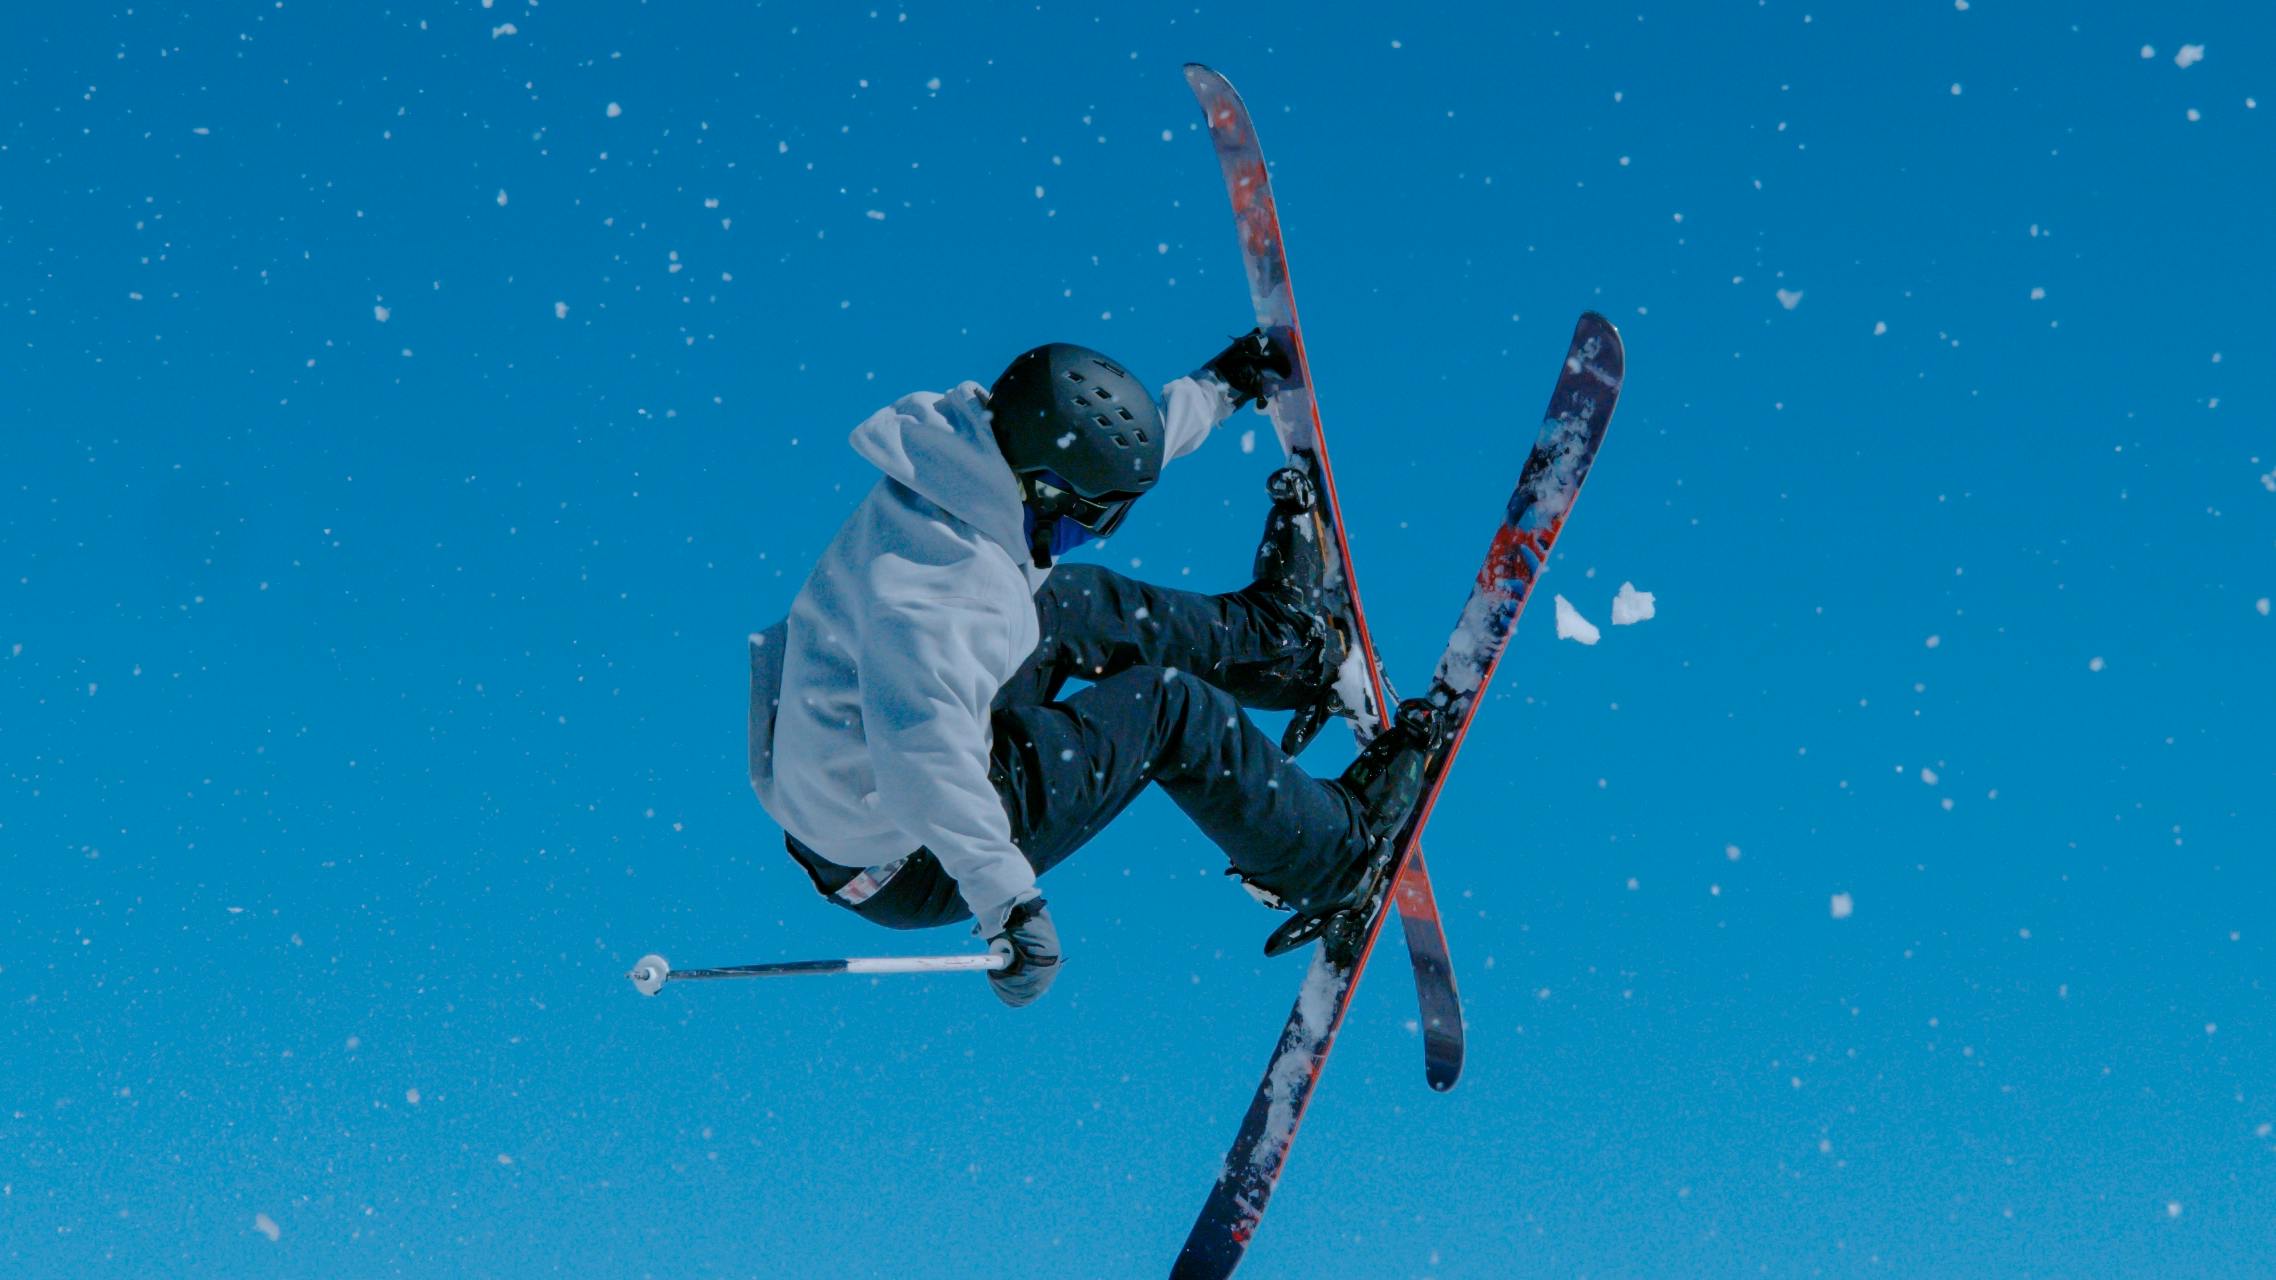 A skier jumping in the air as he grabs his ski.